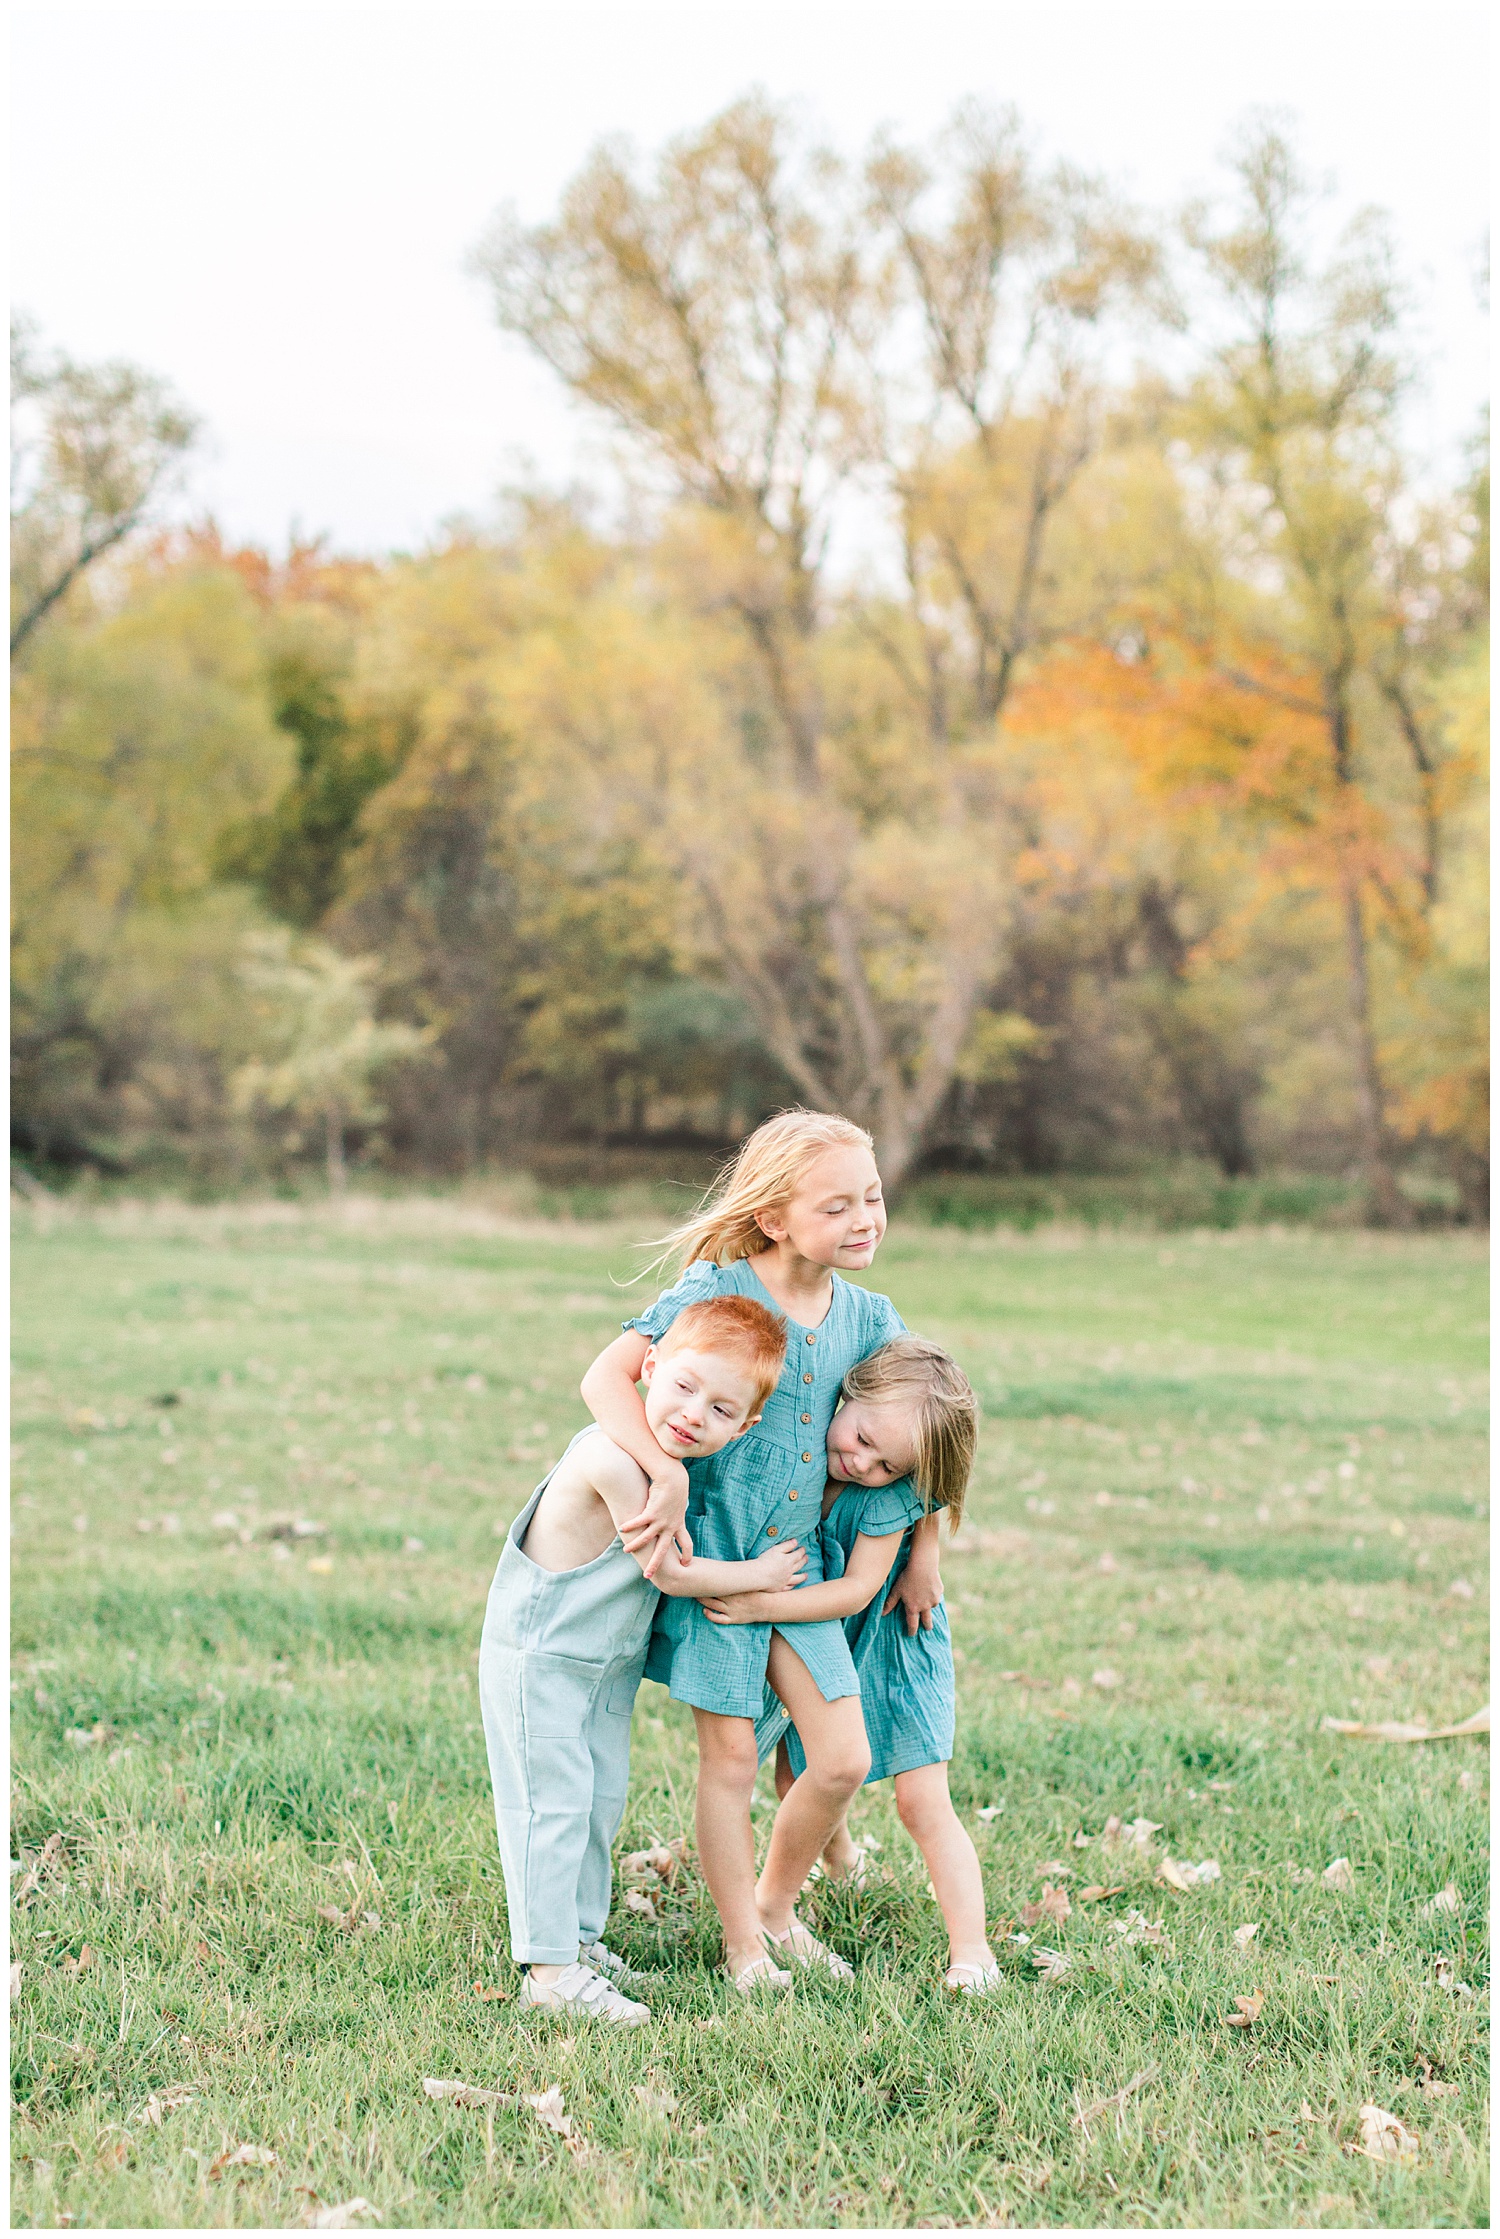 Three children dressed in vintage teal embrace each other in a grassy field looking onward | CB Studio